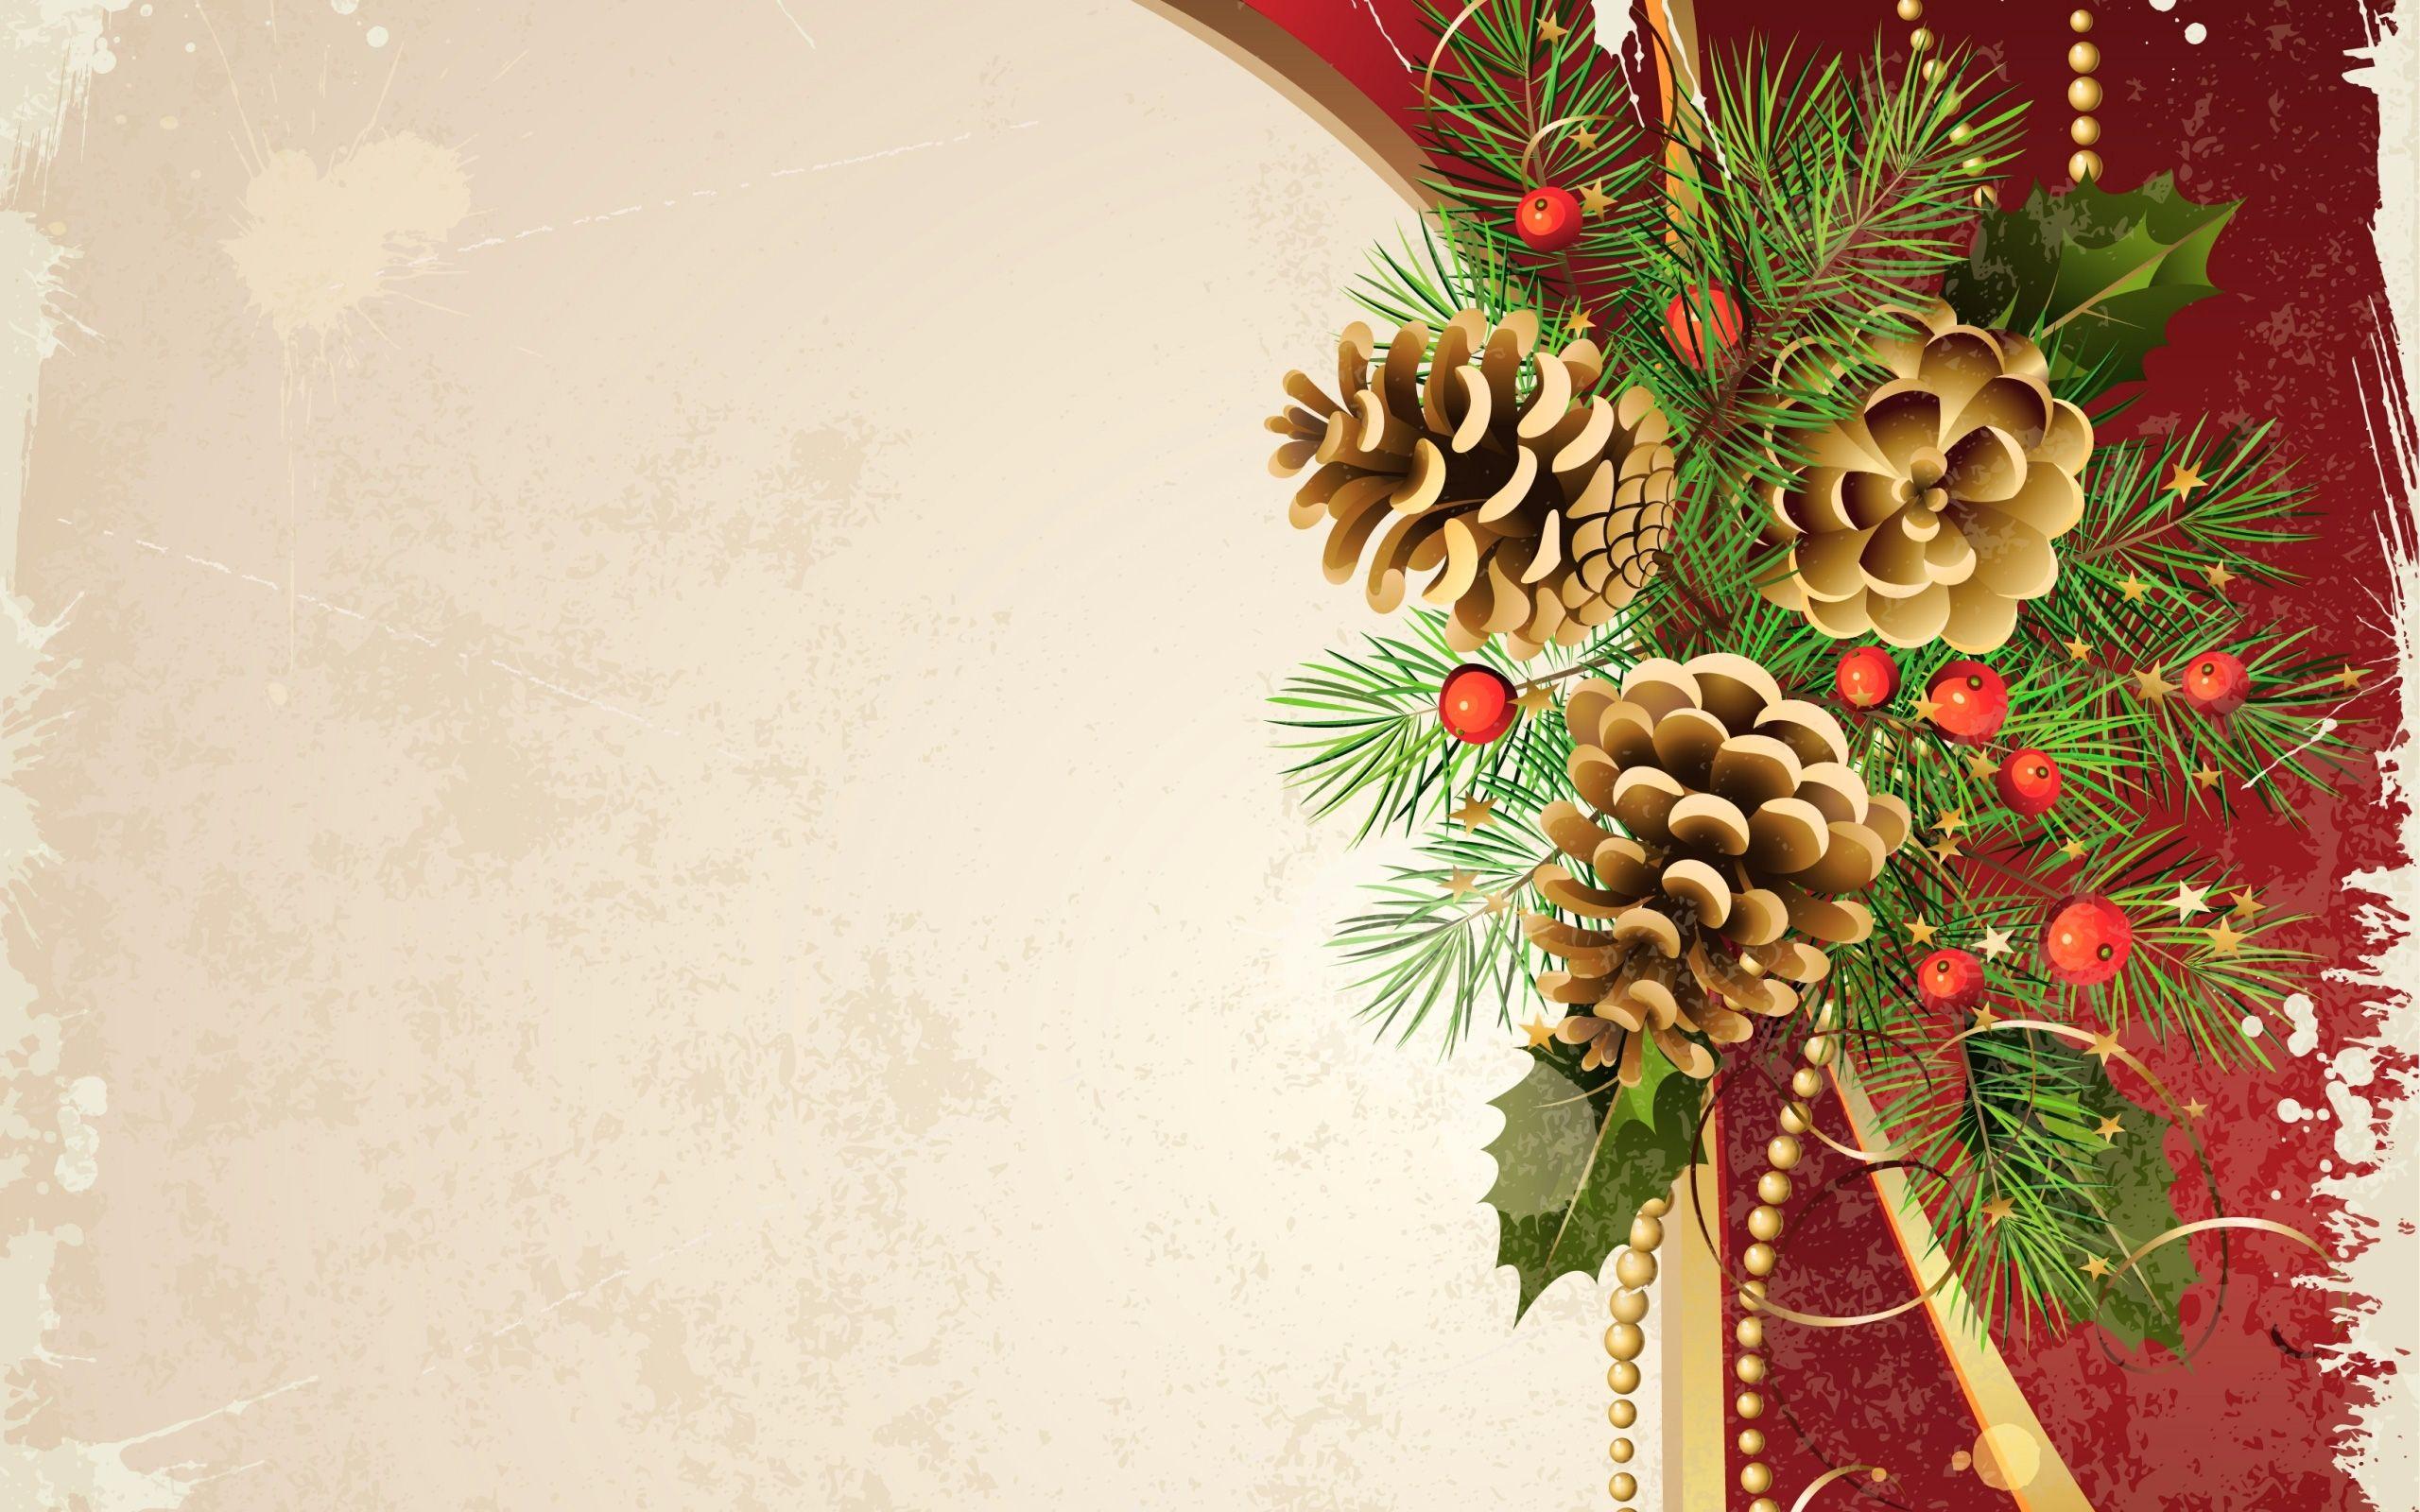 Christmas Background With Pine Cones Quality Image And Transparent PNG Free Clipart